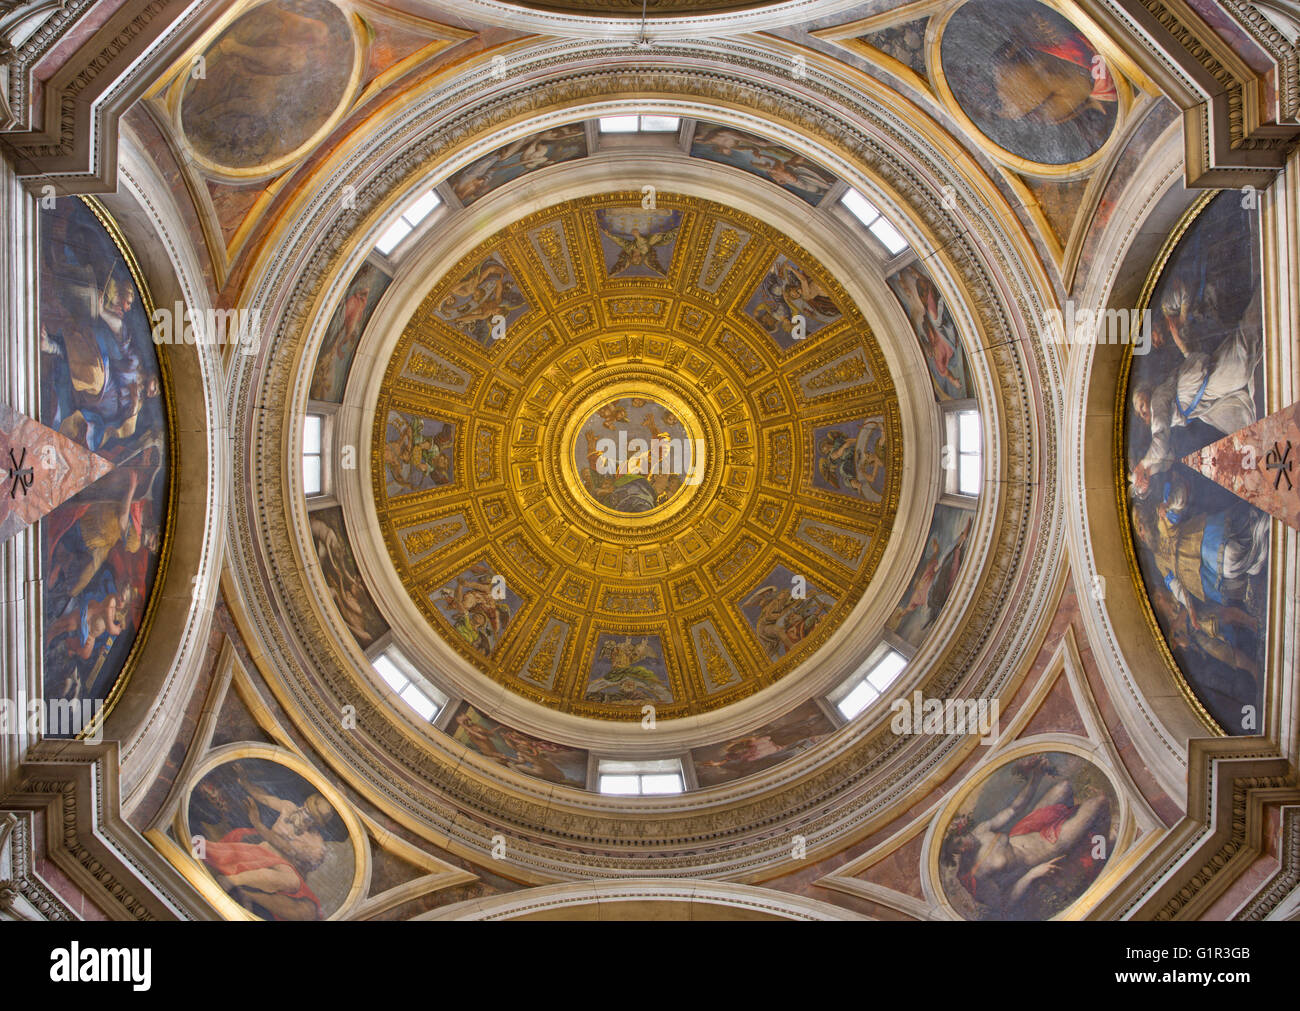 ROME, ITALY - MARCH 9, 2016: The cupola in Chigi chapel designed by Raphael (1483 - 1520) Stock Photo